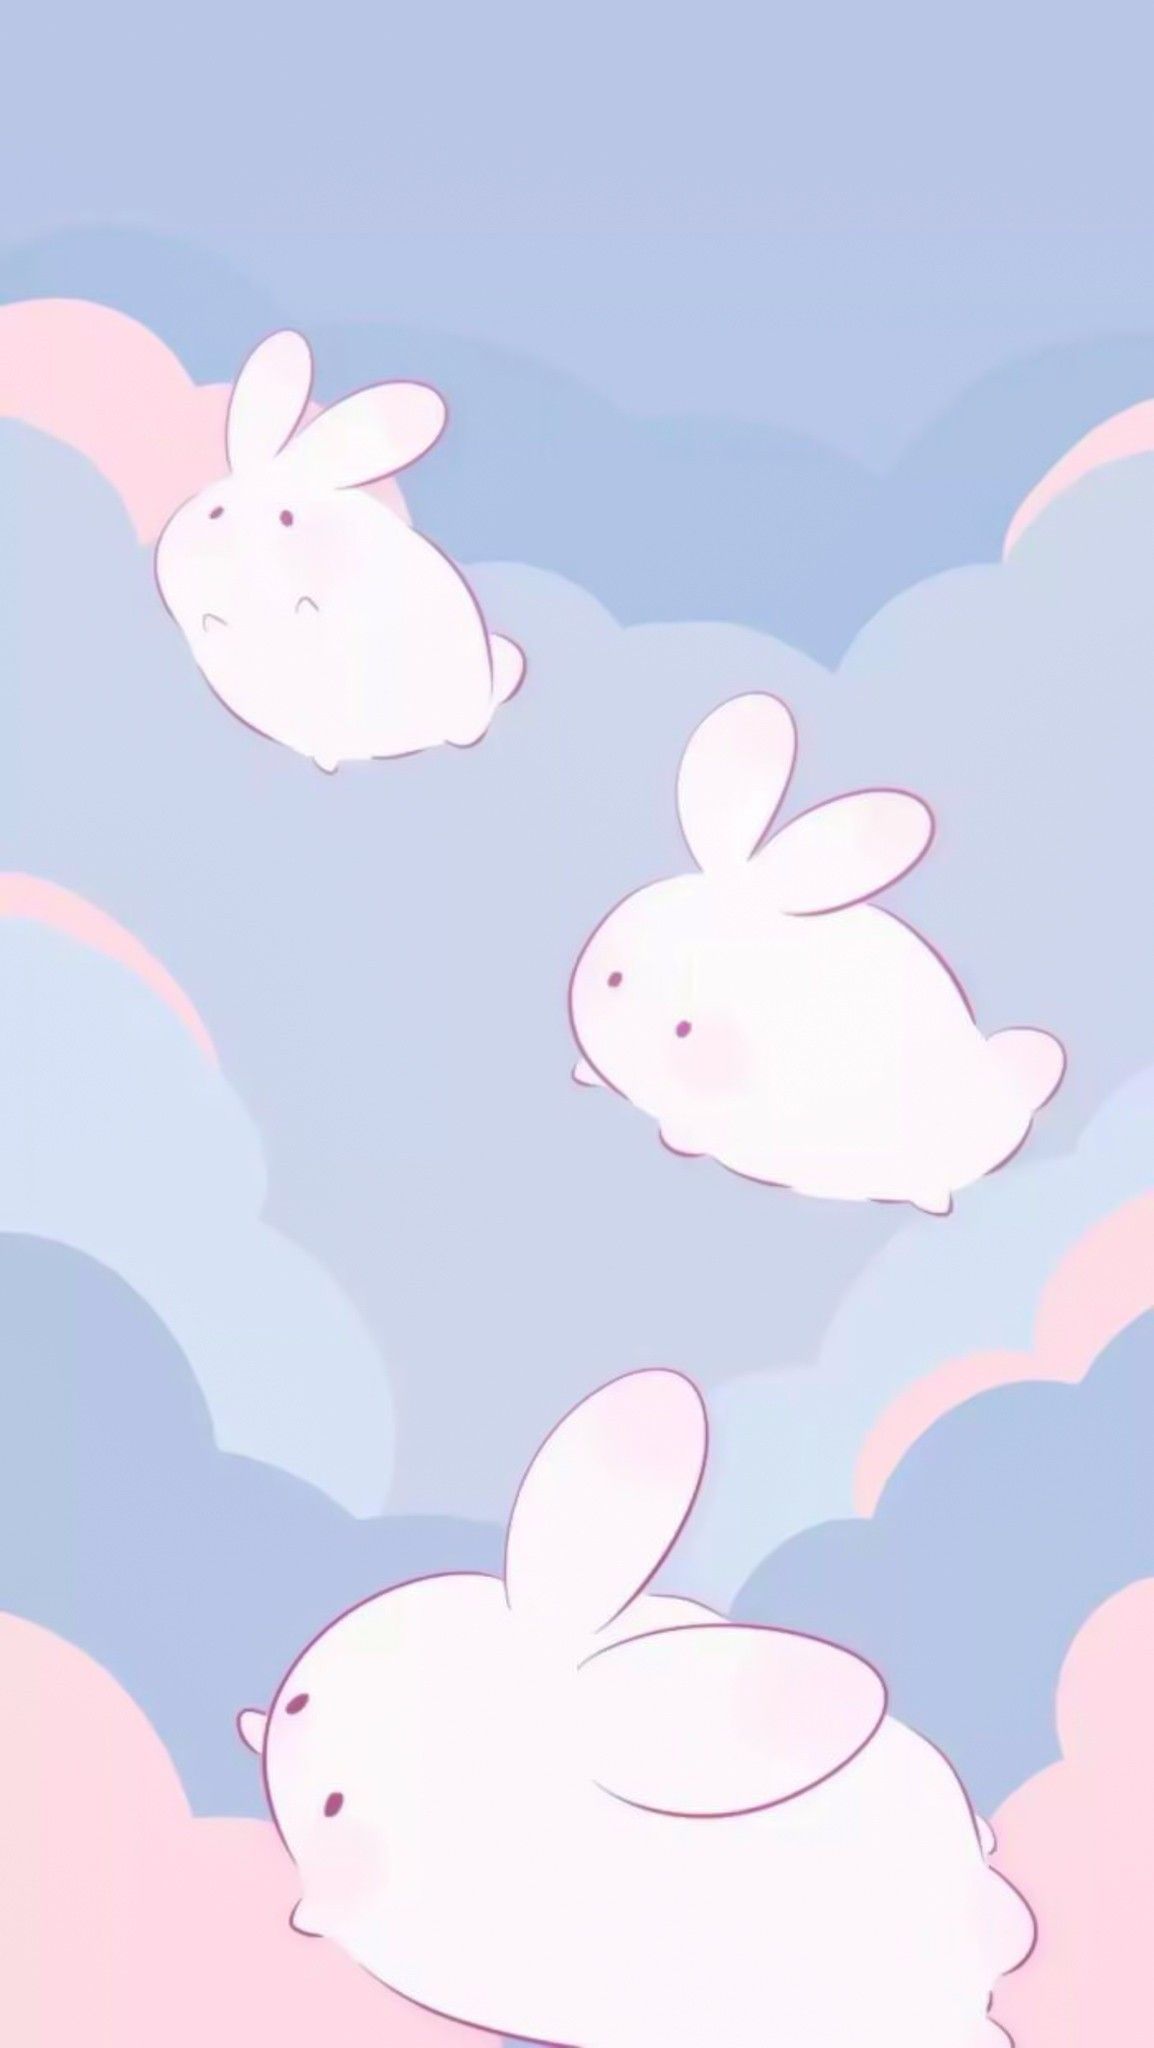 15 Greatest wallpaper aesthetic rabbit You Can Use It Free Of Charge ...